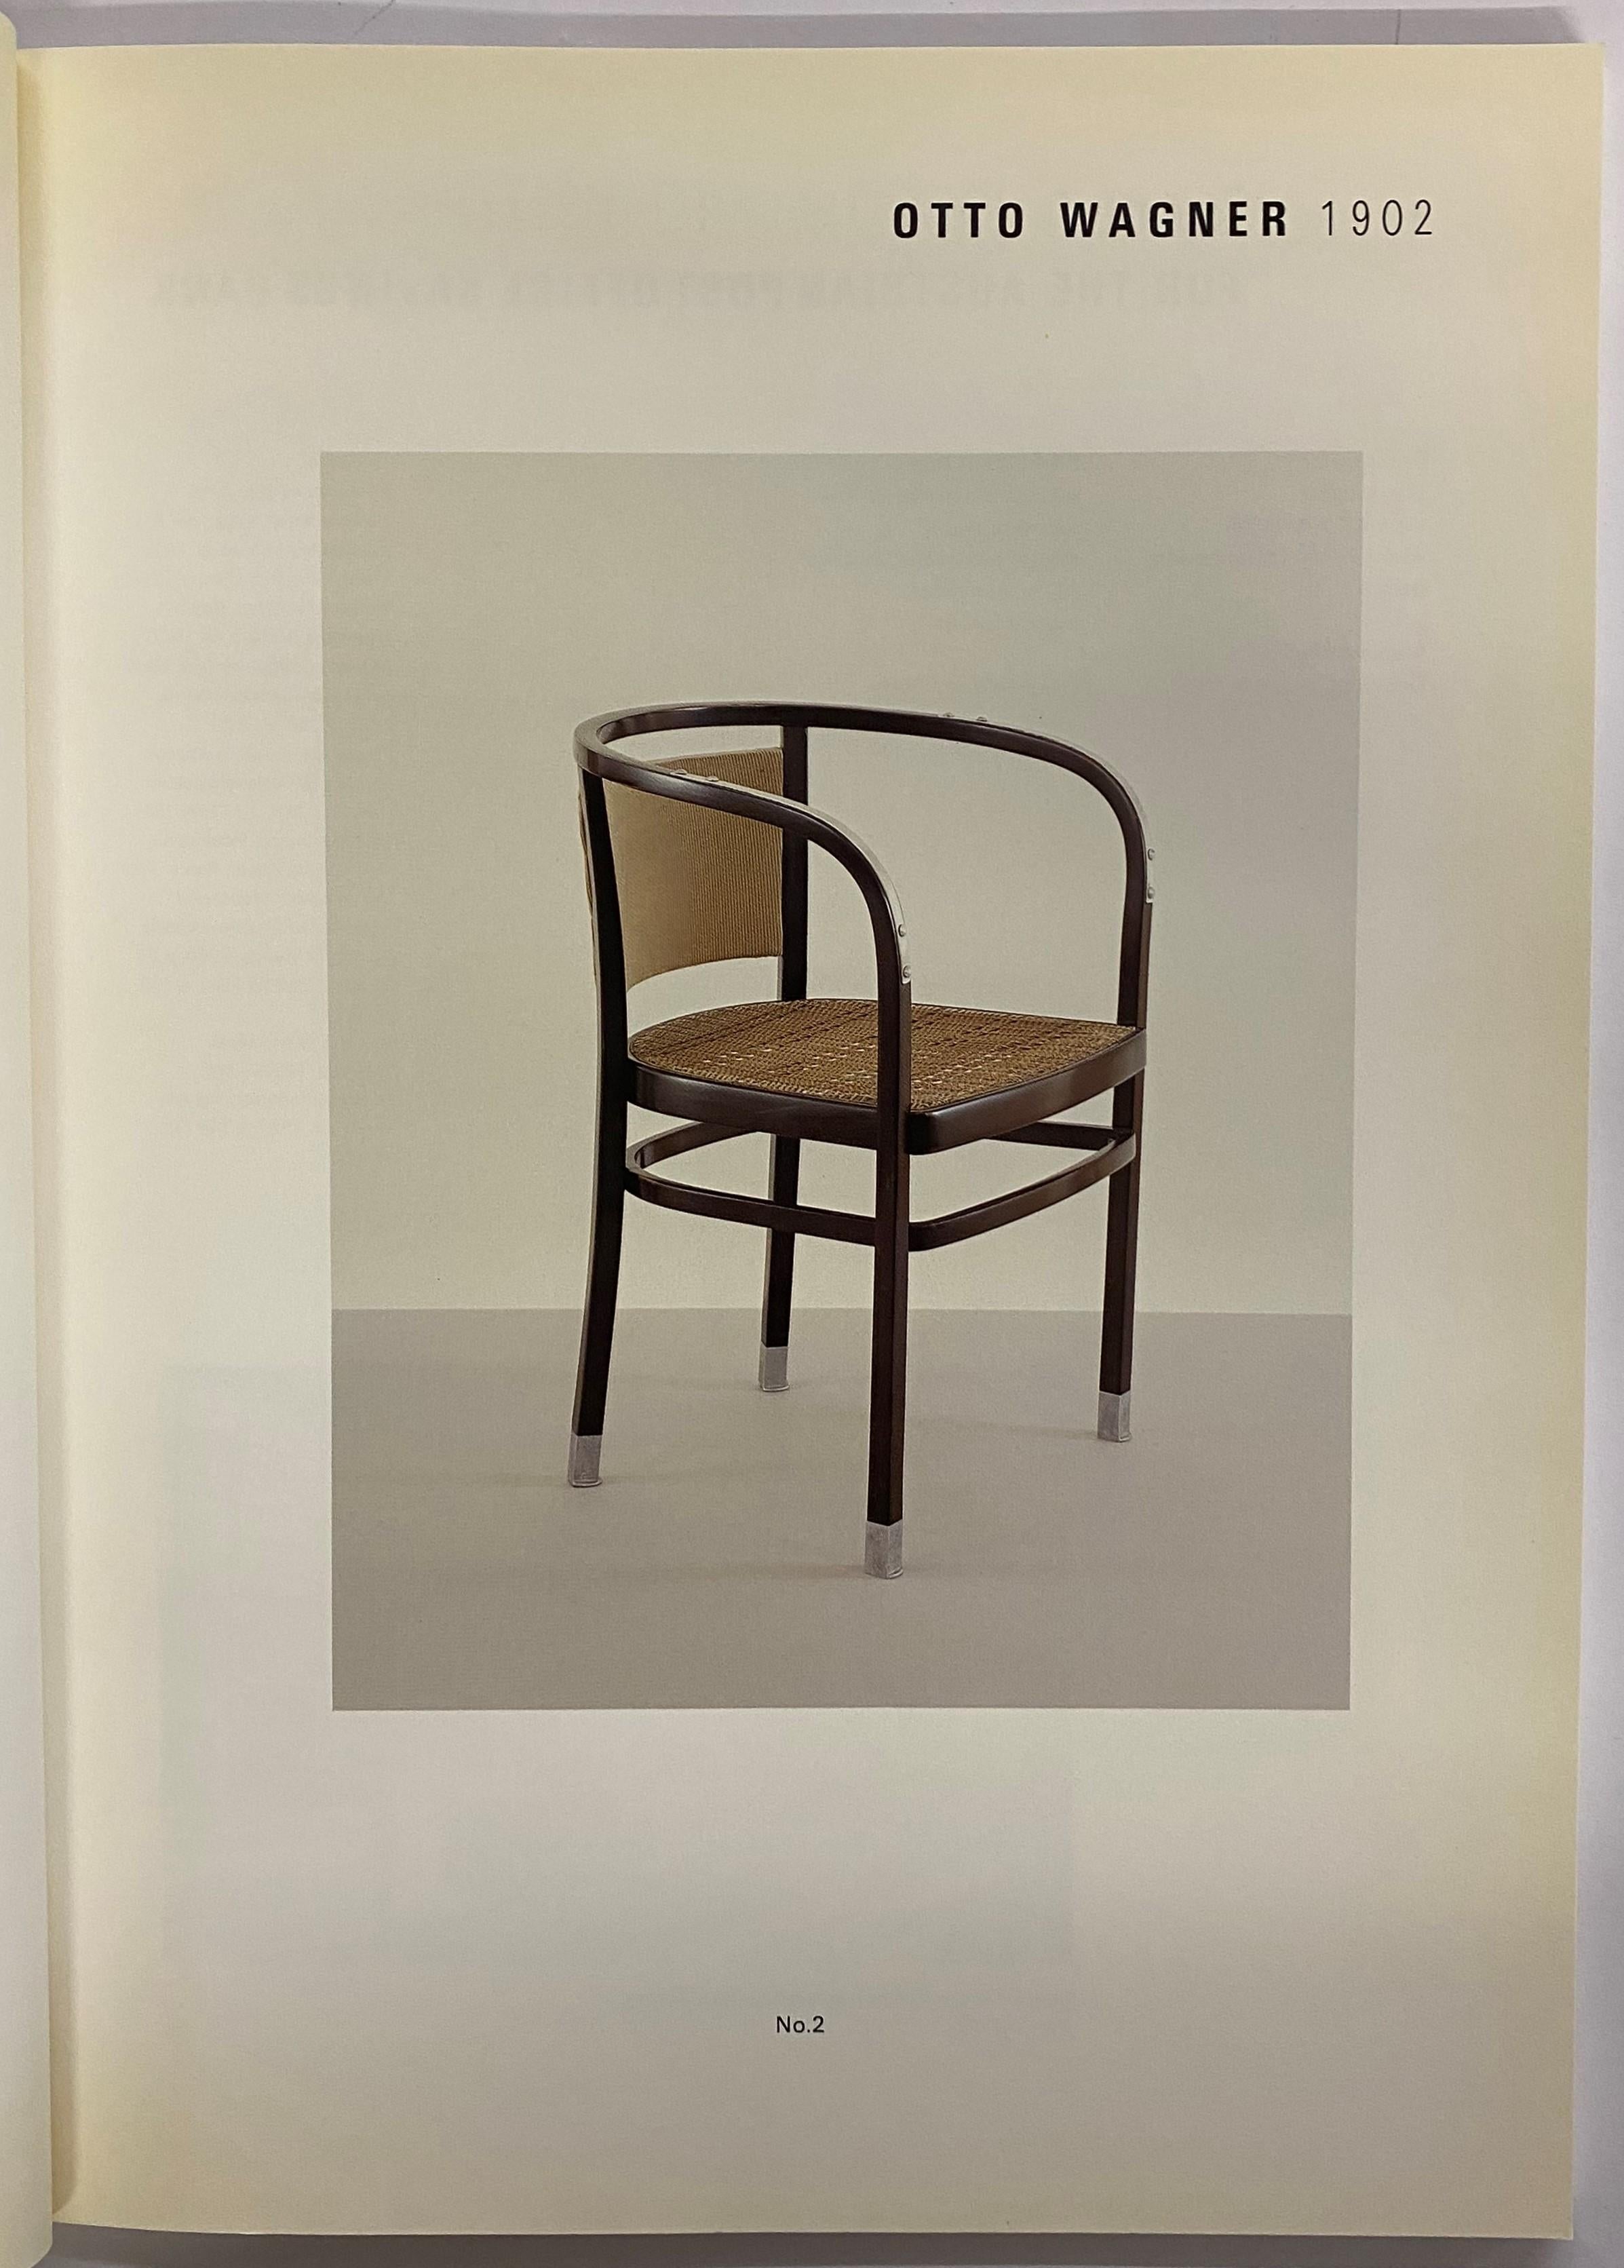 This soft backed catalogue was produced for an exhibition at Fischer Fine Art, London, Which was to show the development of the design of modern furniture from the early years of the 20th century up to the 1960s. Each of the 34 selected pieces are